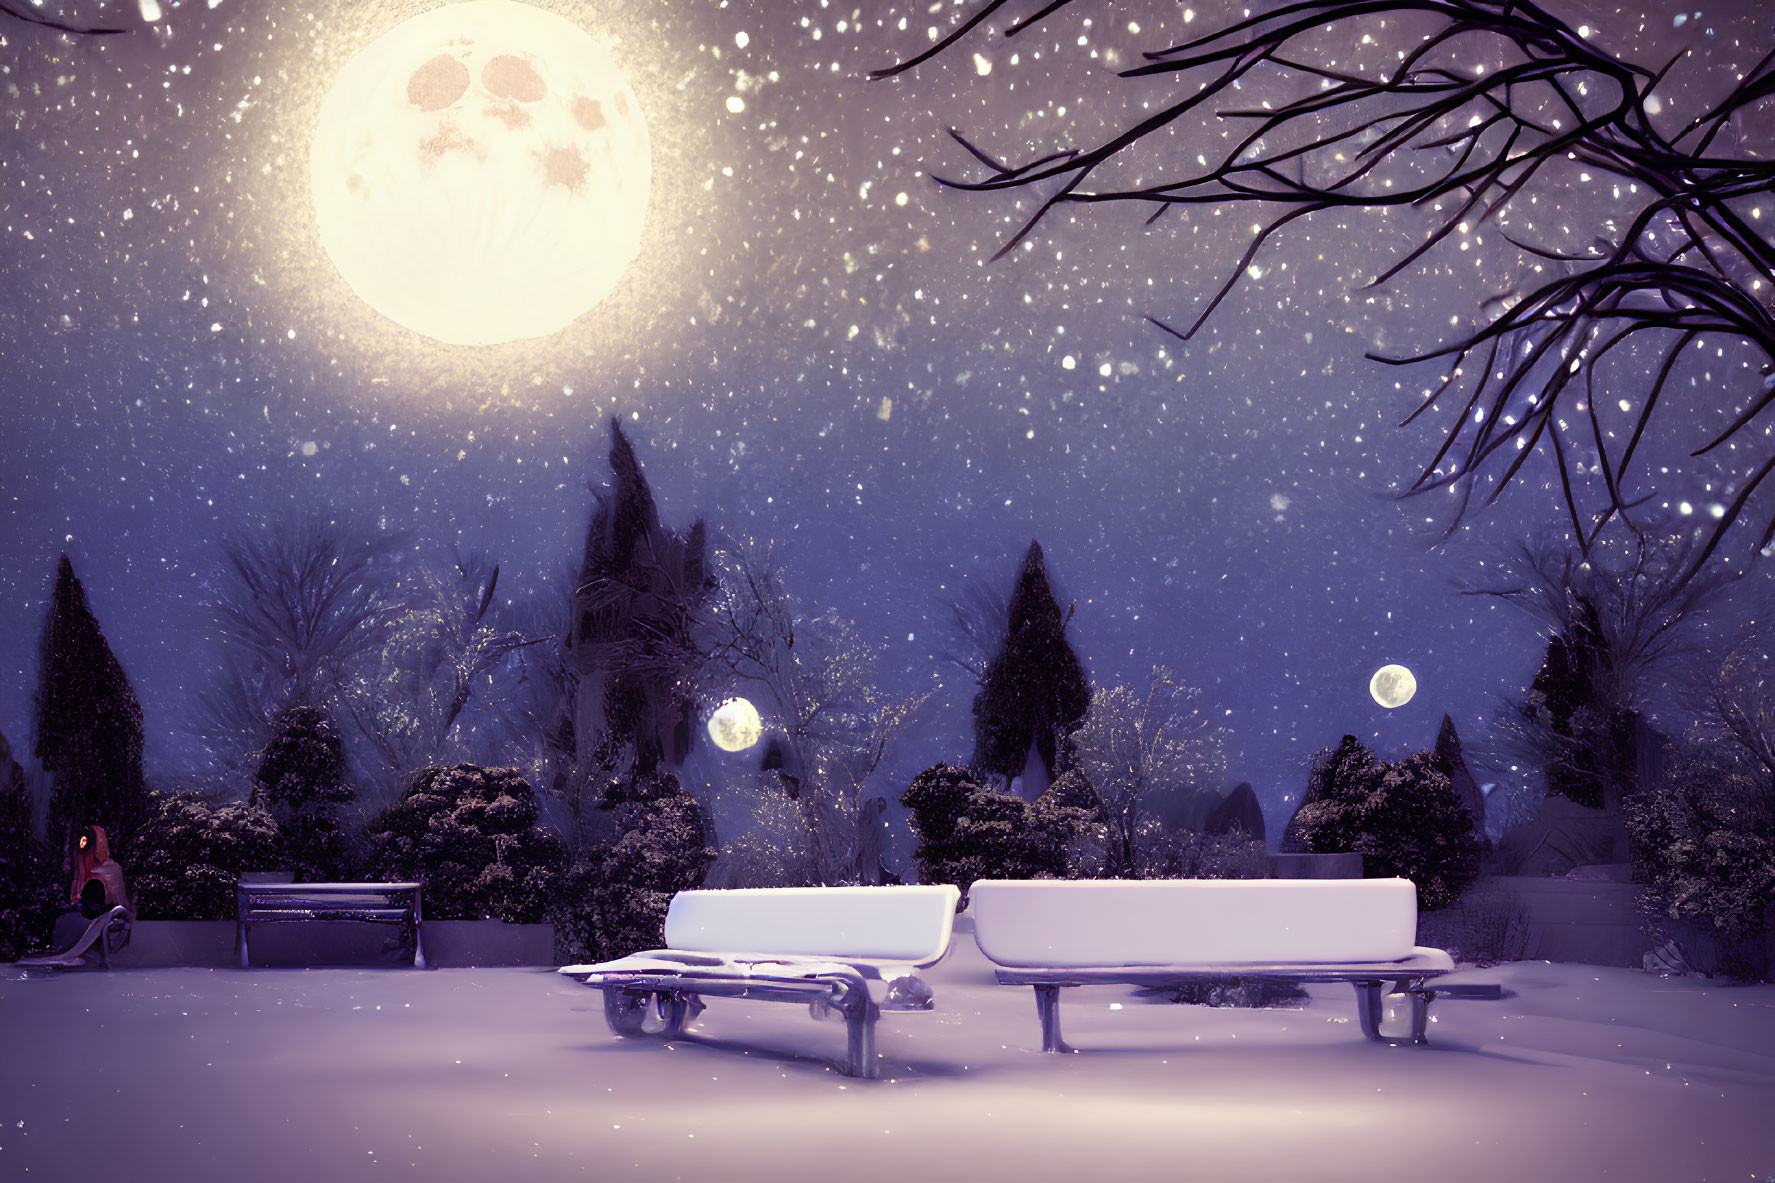 Snowy Park at Night: Two Benches, Leafless Trees, Full Moon, Falling Snowfl